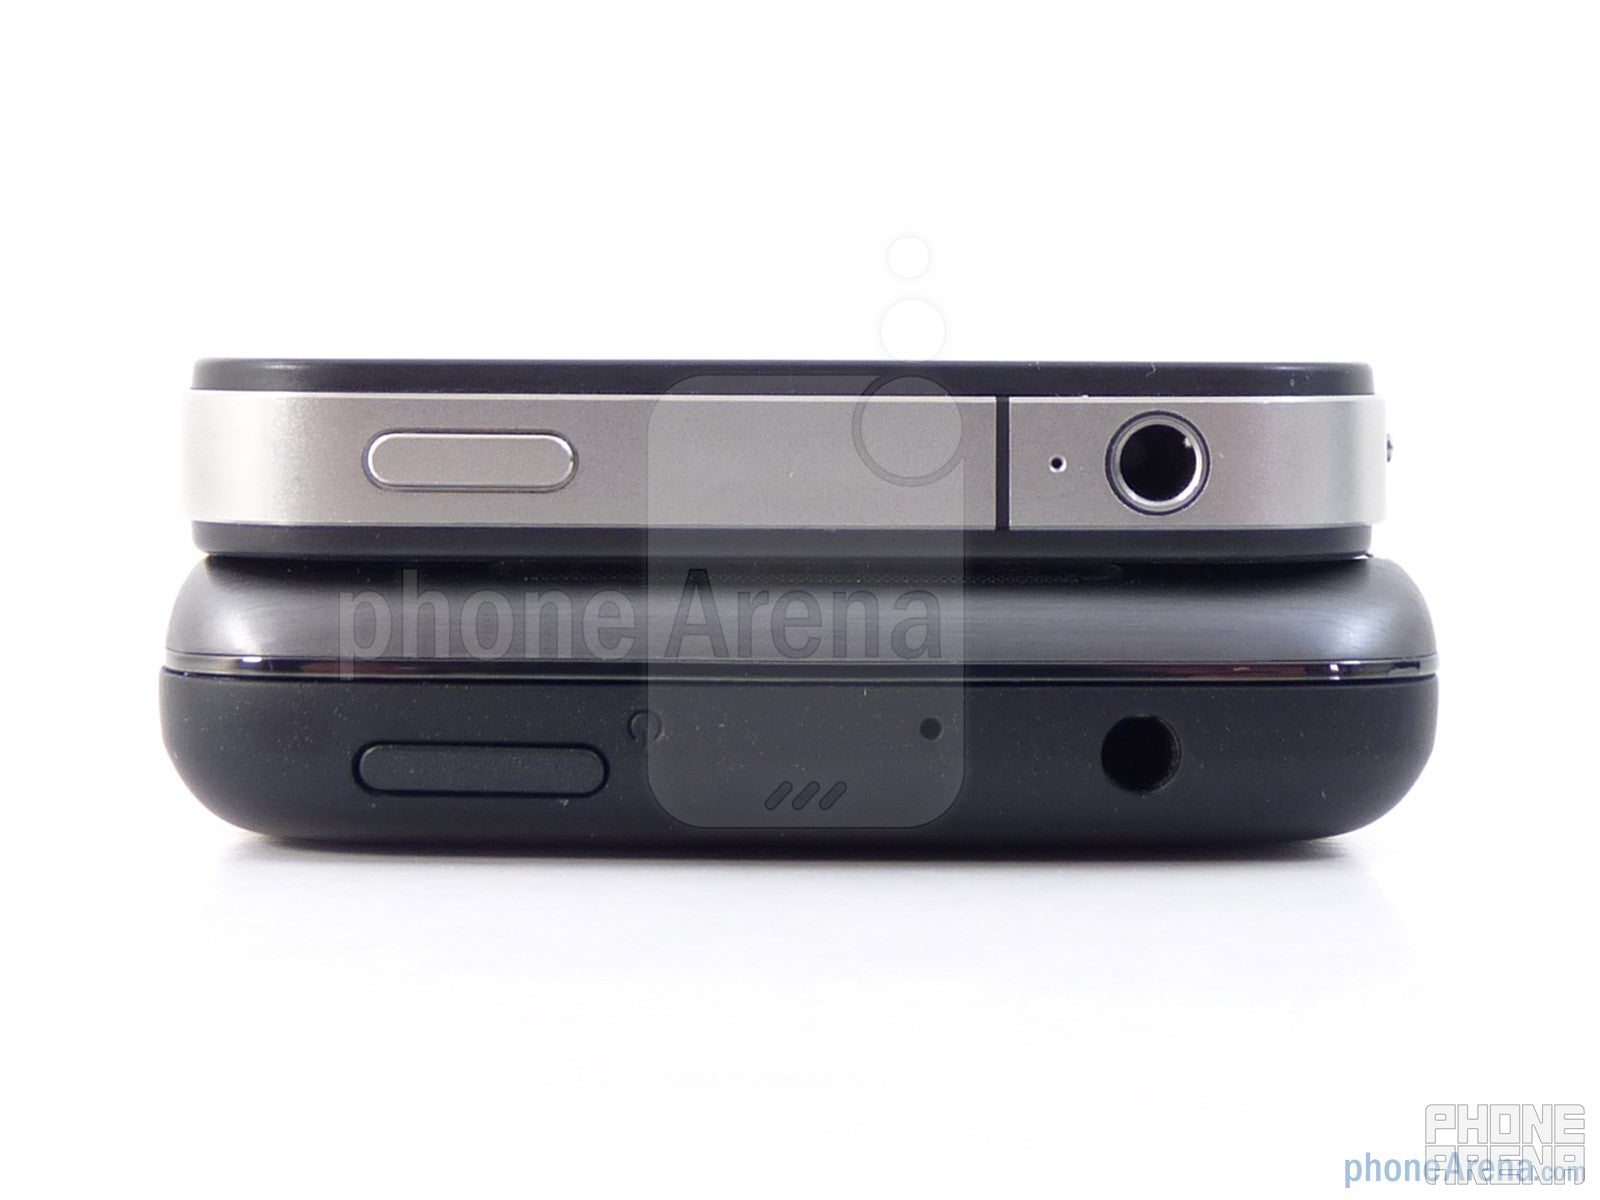 3.5mm jacks and power buttons are on the top edges of both devices - HTC Surround vs Apple iPhone 4